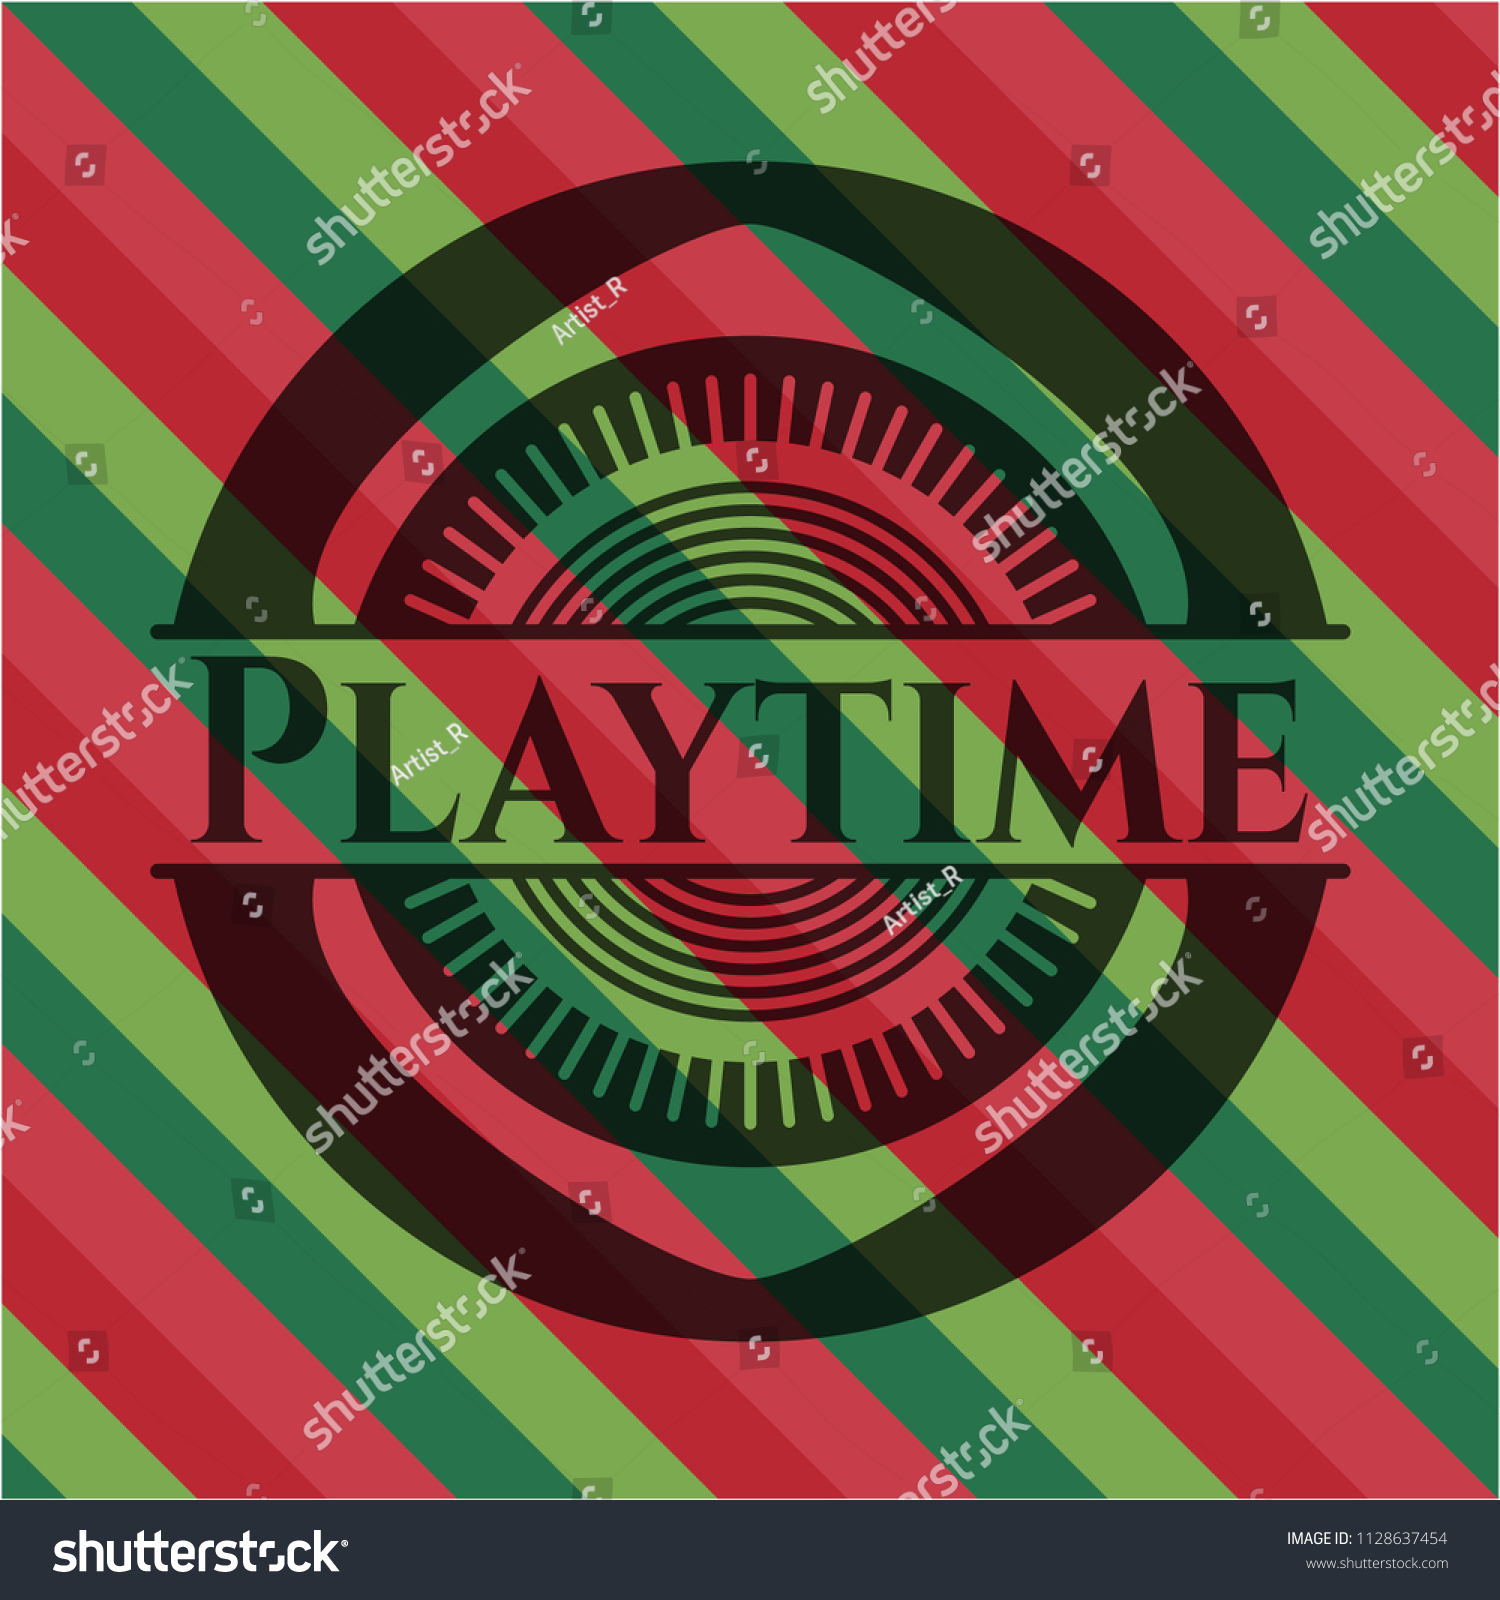 Playtime Christmas Badge Background Stock Vector Royalty